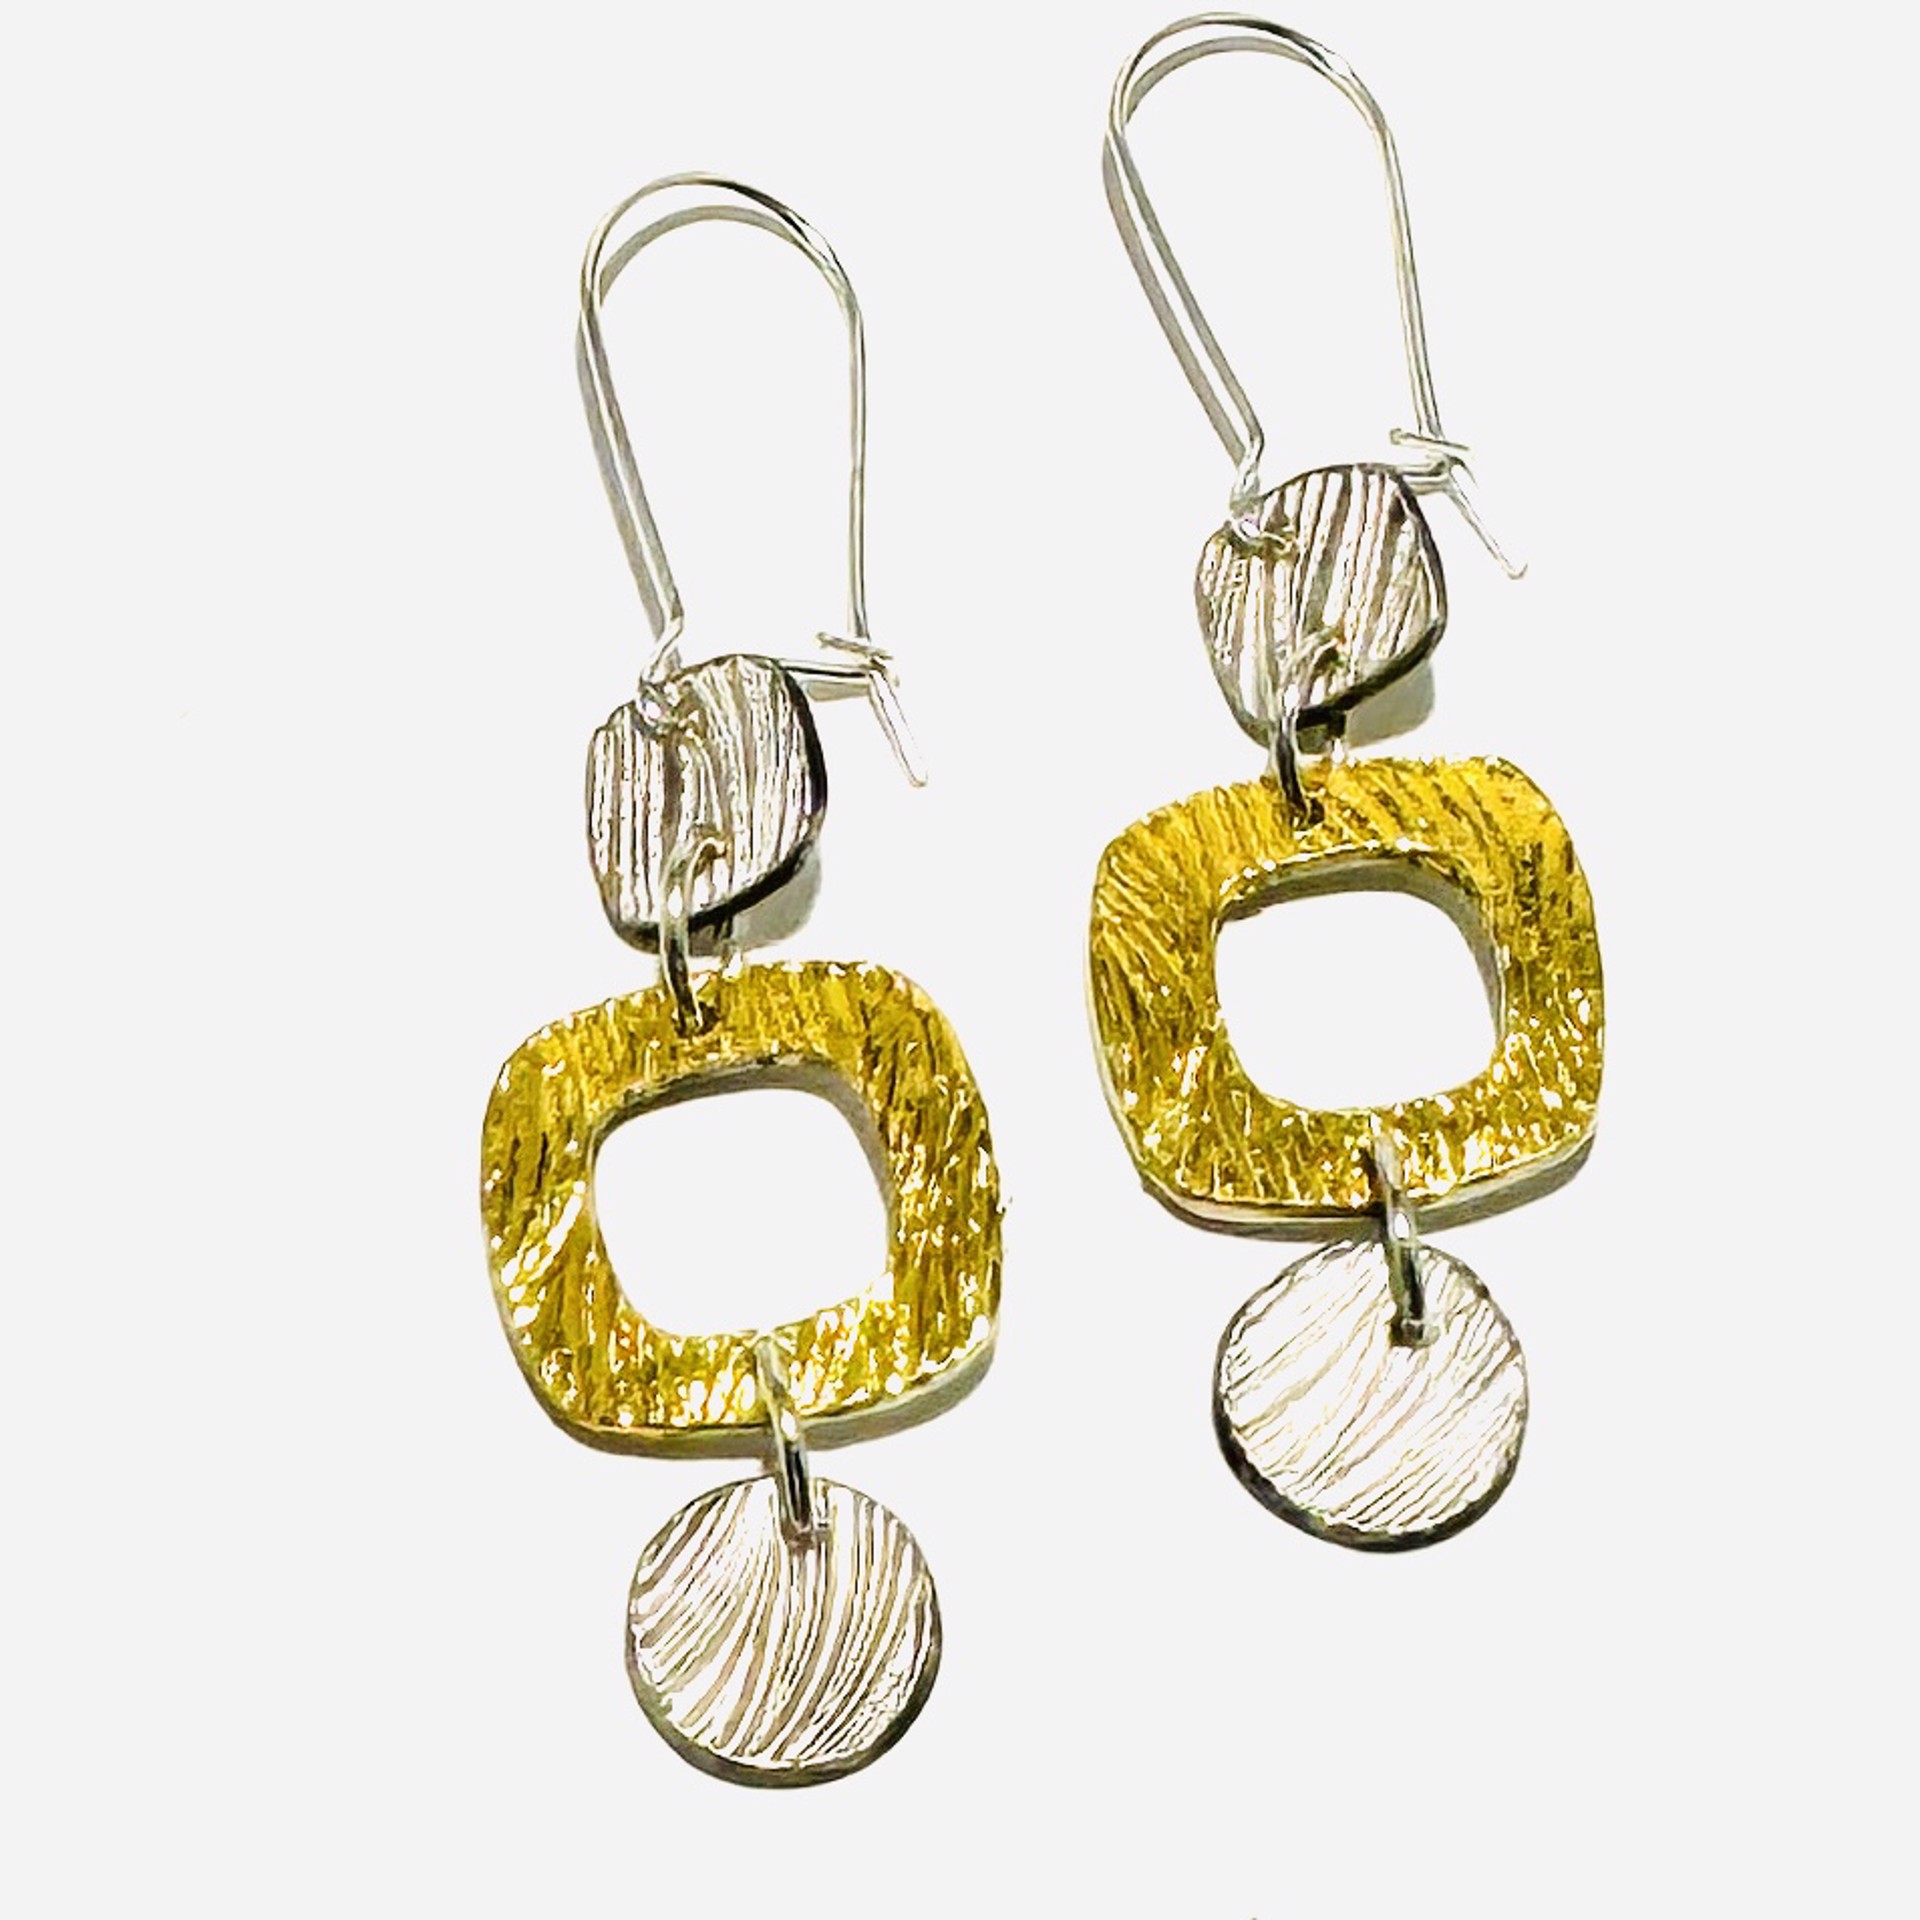 Keum-boo Fine Silver and Gold Square Trio Earrings KH23-27 by Karen Hakim